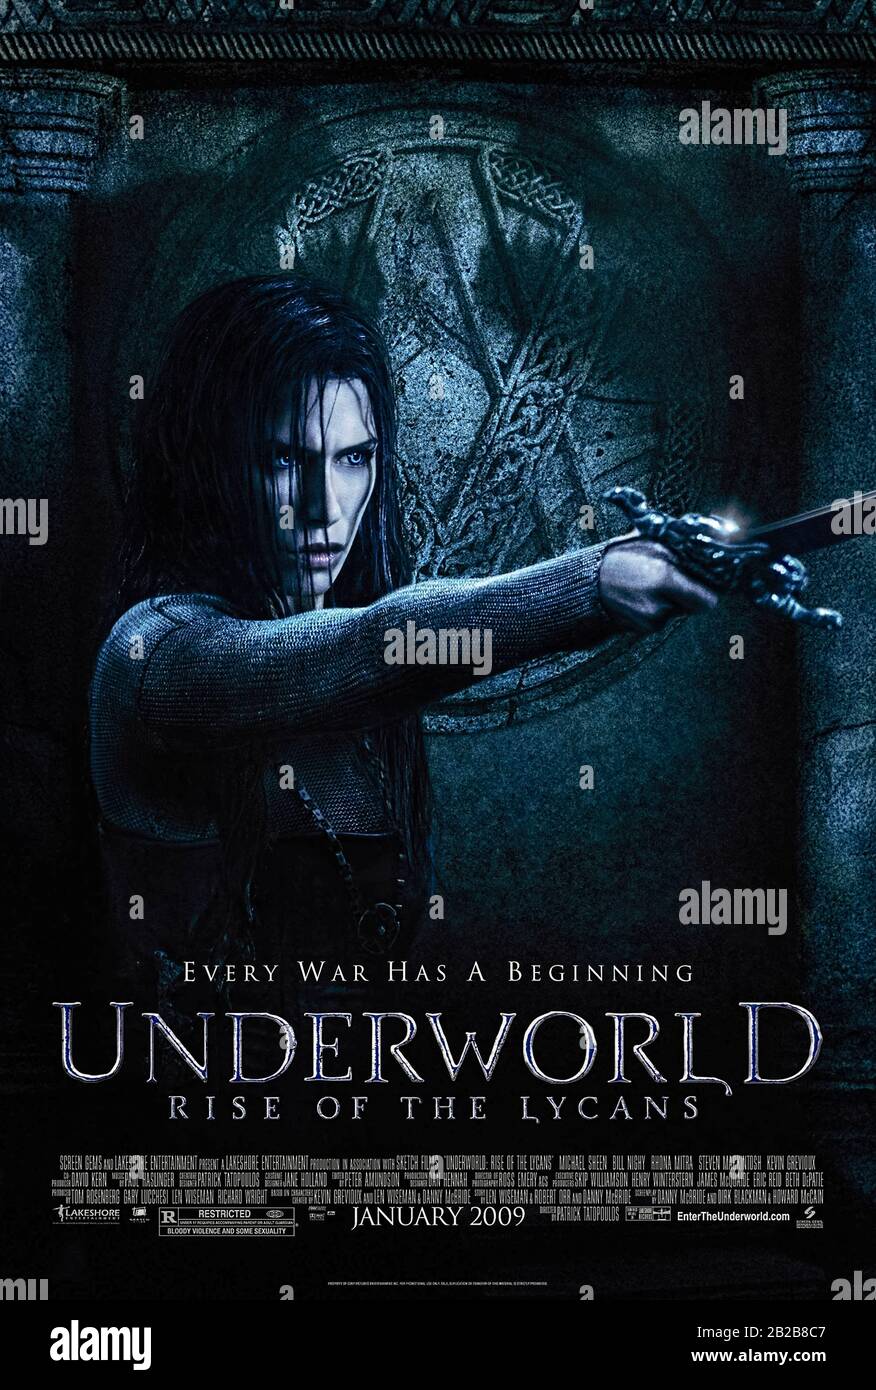 Underworld: Rise of the Lycans (2009) directed by Patrick Tatopoulos and starring Rhona Mitra, Michael Sheen, Bill Nighy and Kevin Grevioux. Prequel origin story of the beginning of the Vampire-Lycan war between vampires and werewolves. Stock Photo